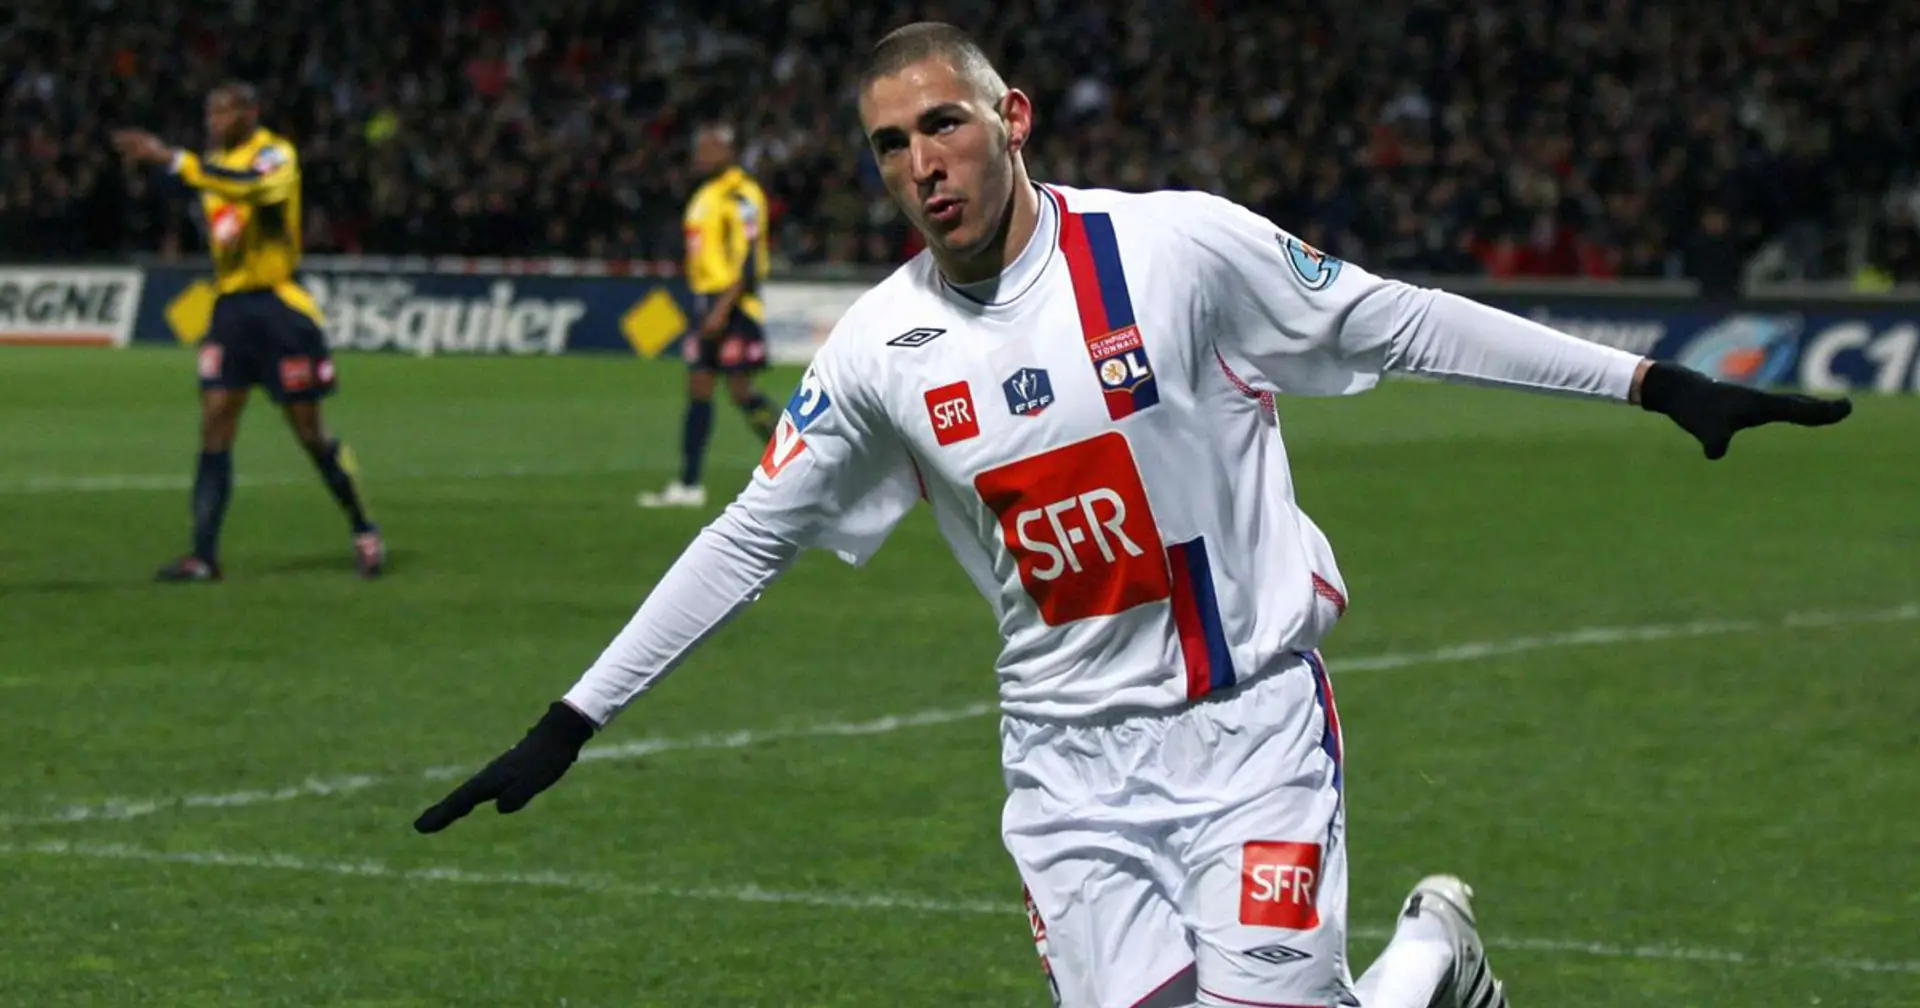 'This is our dream': Lyon's sporting director Juninho wants Benzema to return